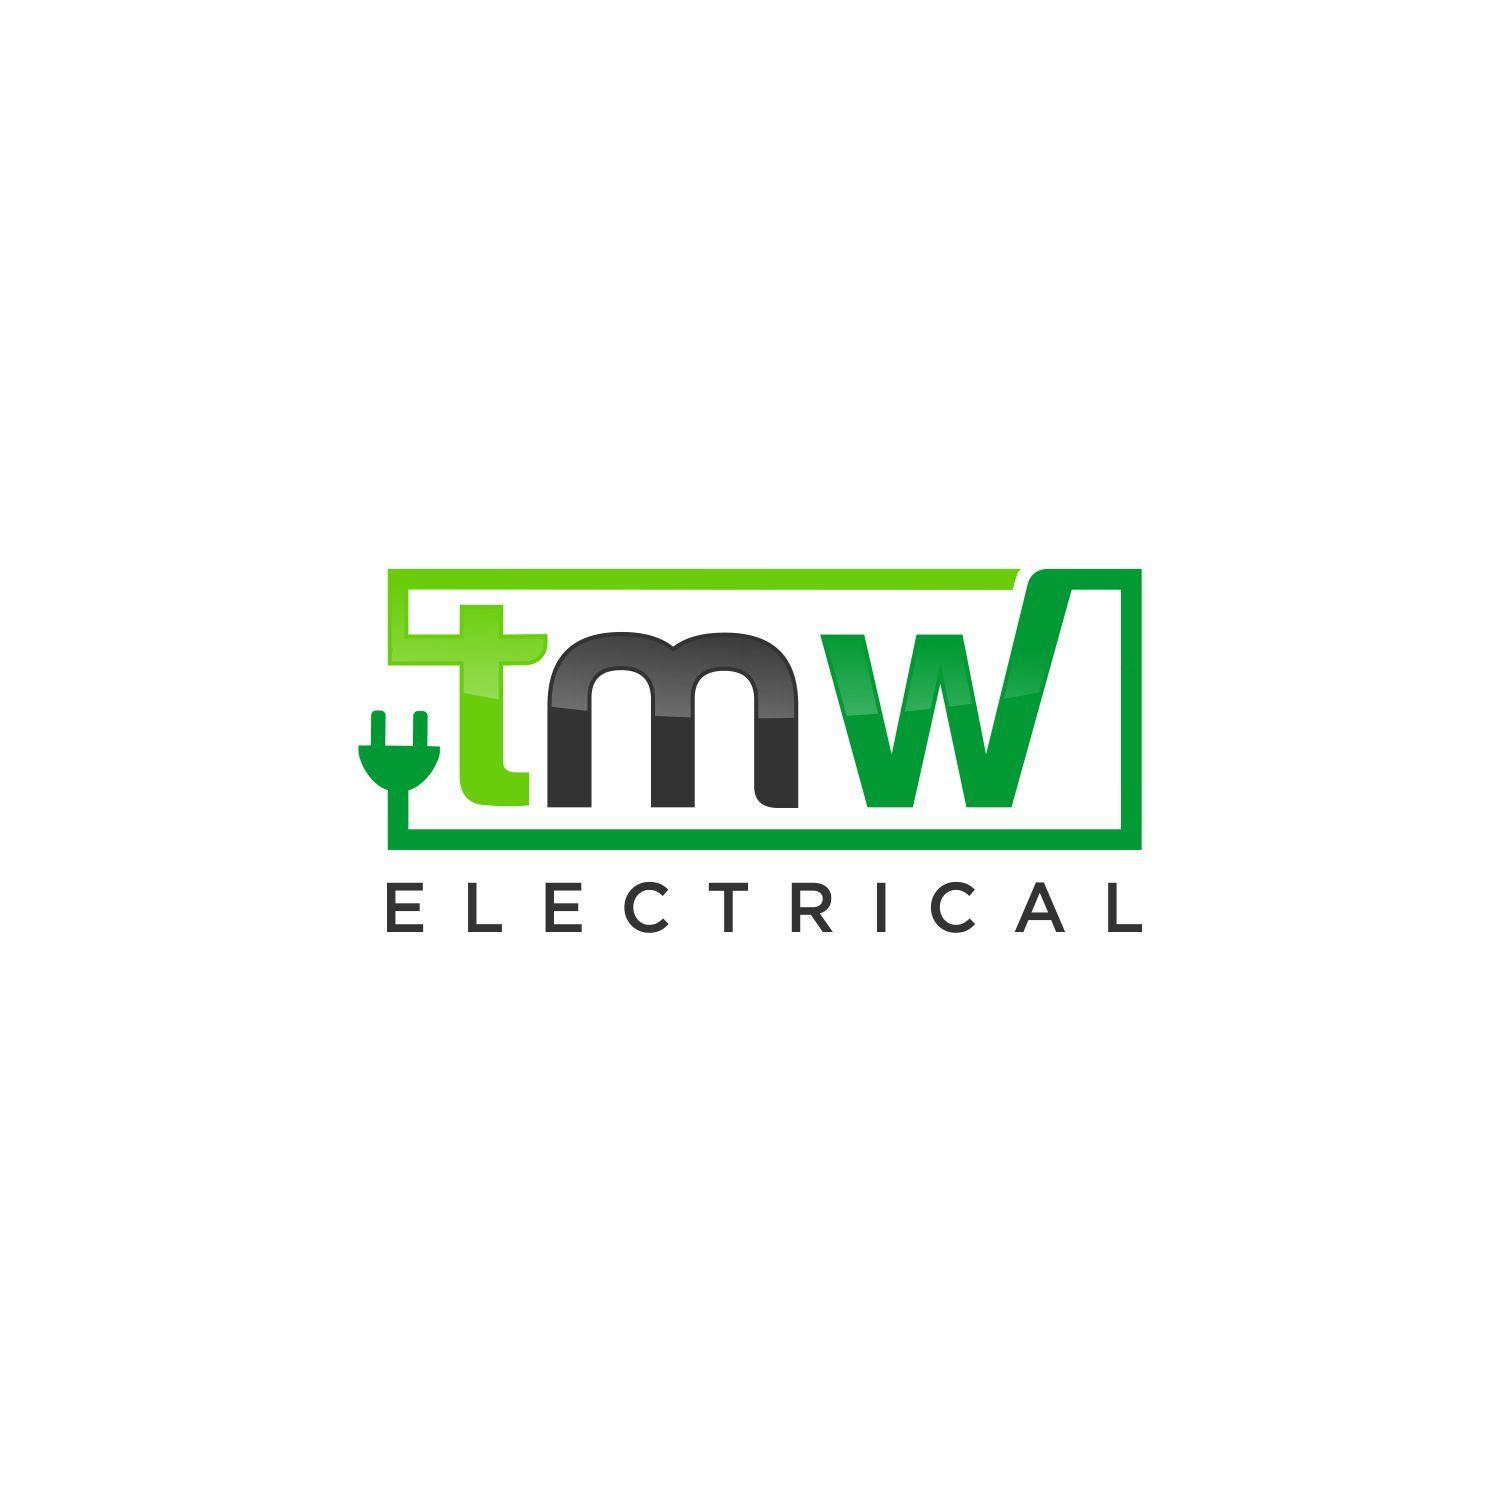 Electrical Graphics Logo - Masculine, Serious, Electrical Logo Design for TMW Electrical by HT ...